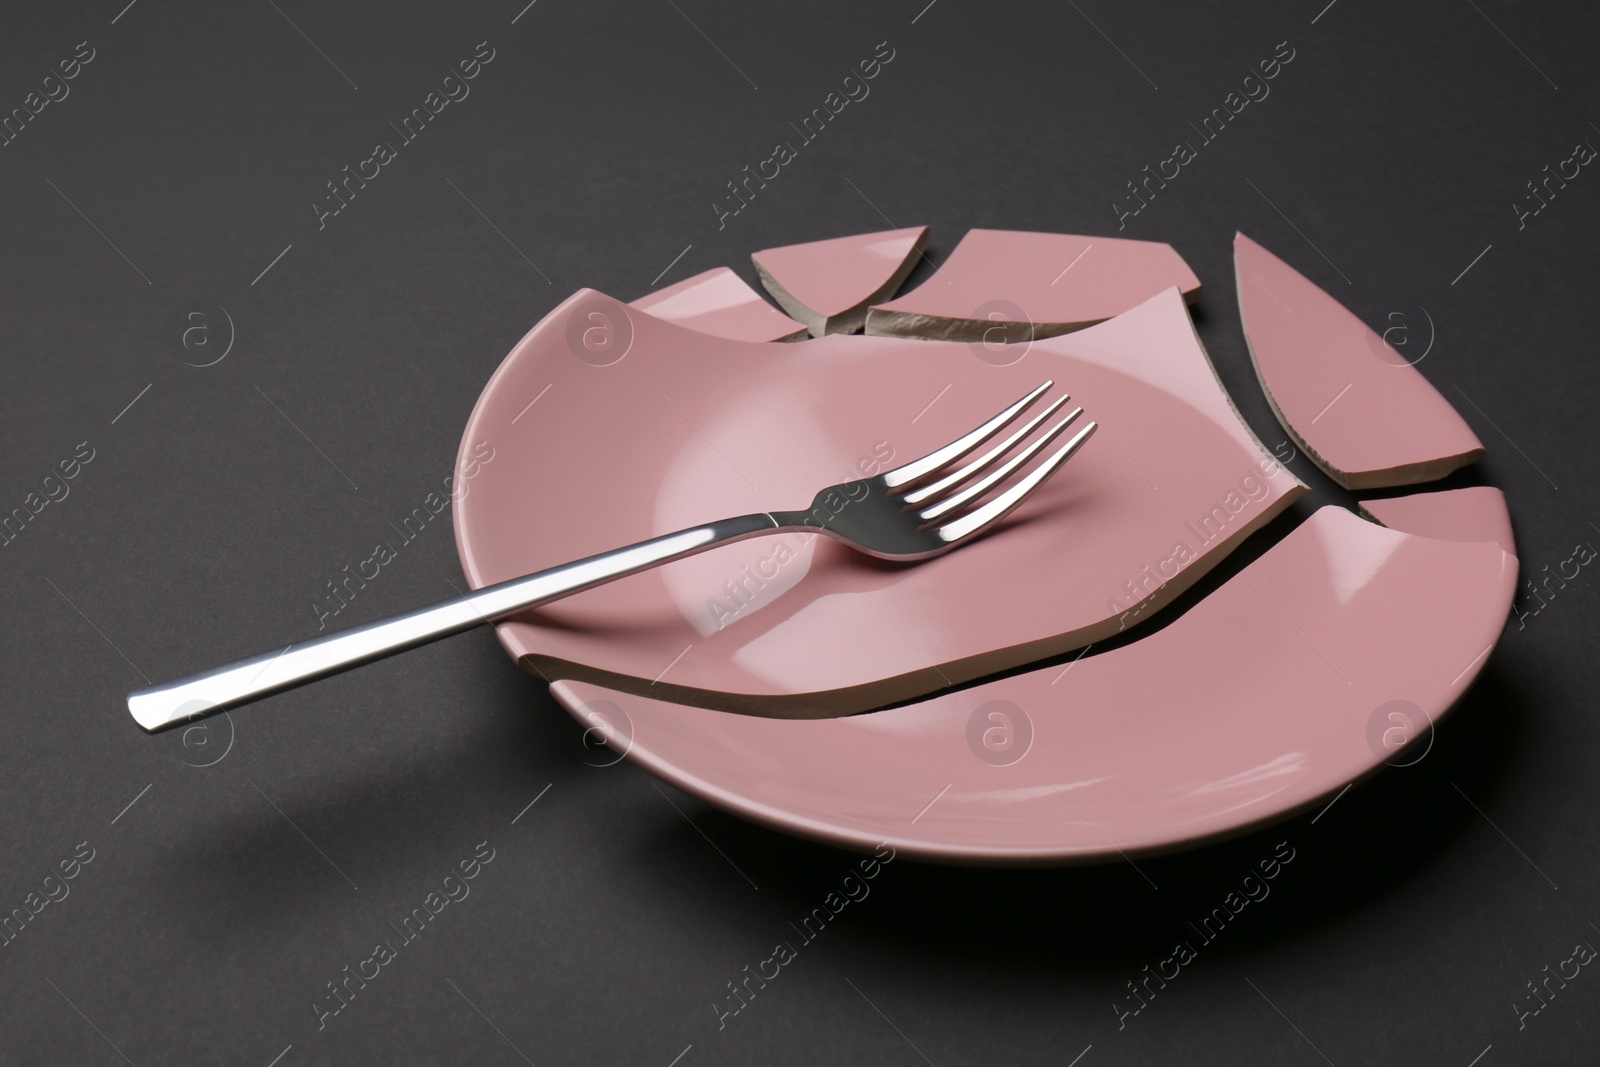 Photo of Pieces of broken ceramic plate and fork on dark grey background